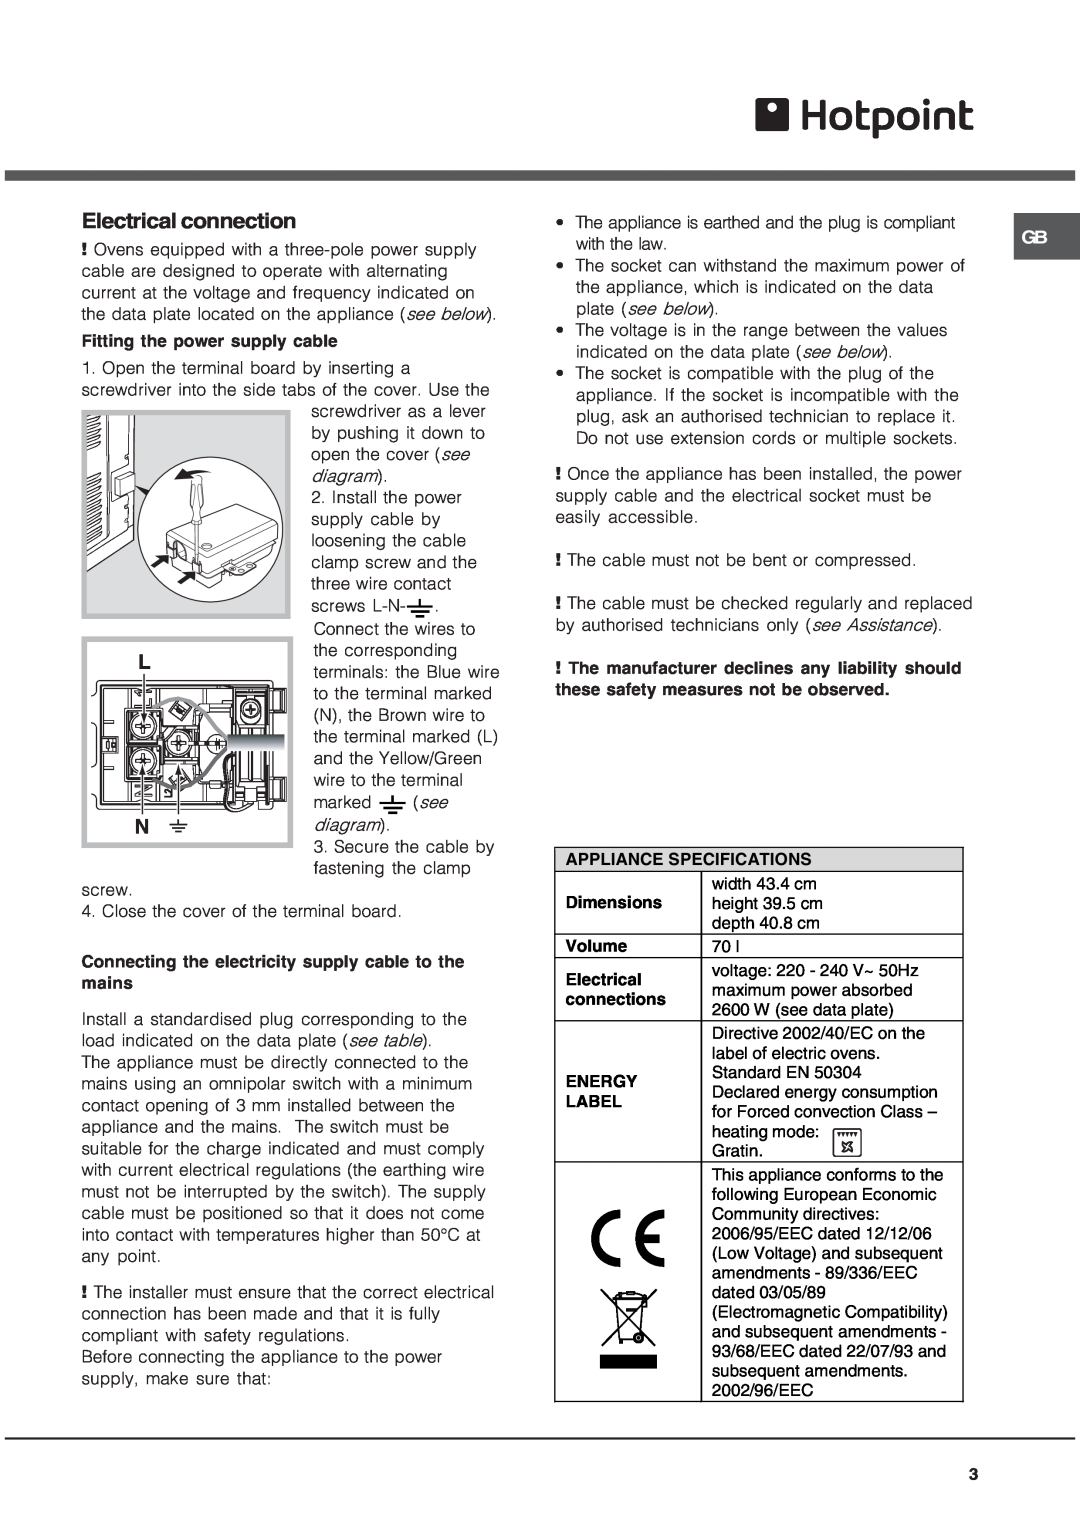 Hotpoint OS89CHP, OS89IX, OS89CIX, OS89HP operating instructions Electrical connection 